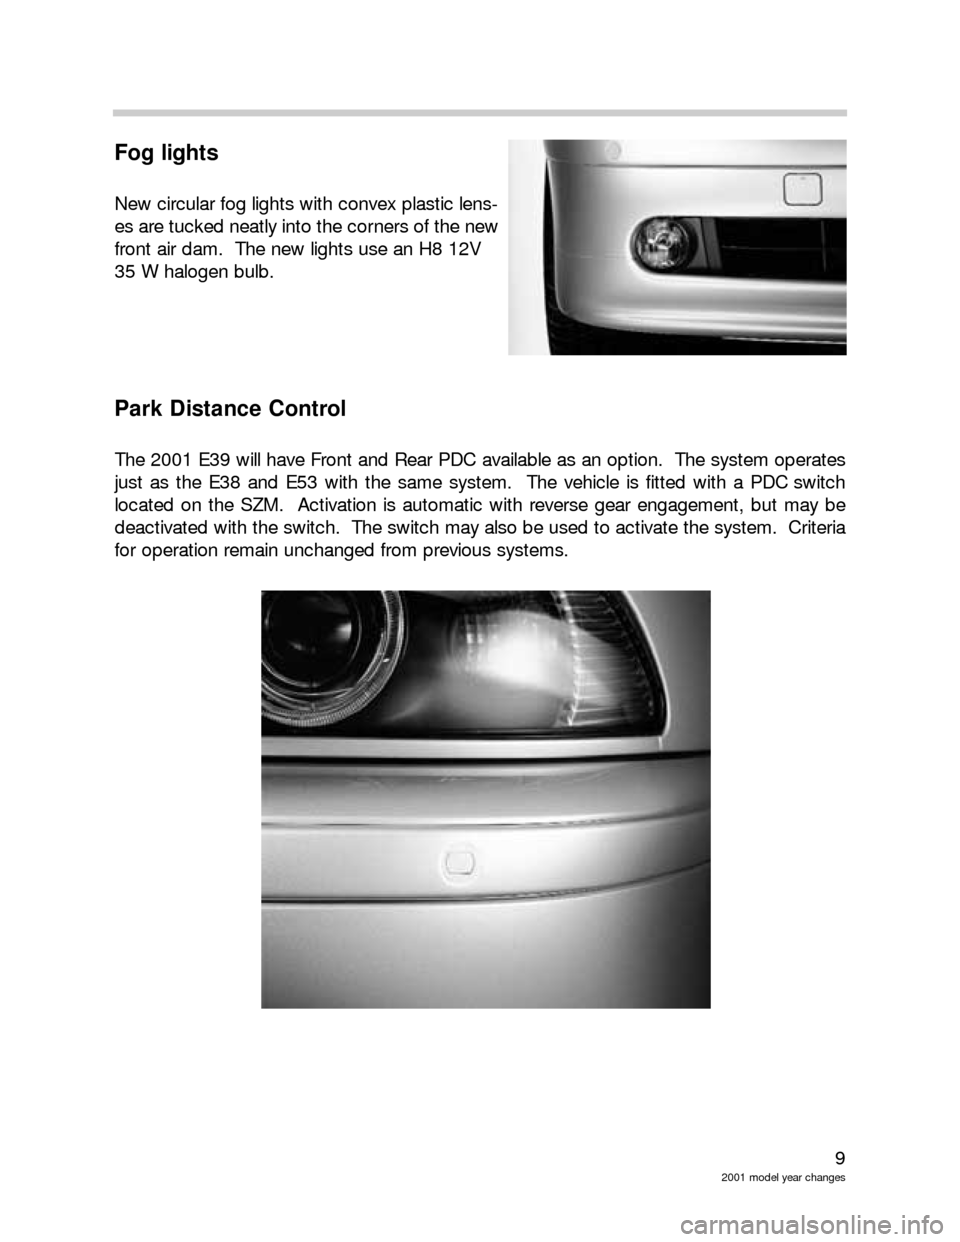 BMW 5 SERIES 2001 E39 Model Yar Changes 9
2001 model year changes
Fog lights
New circular fog lights with convex plastic lens-
es are tucked neatly into the corners of the new
front air dam.  The new lights use an H8 12V 
35 W halogen bulb.